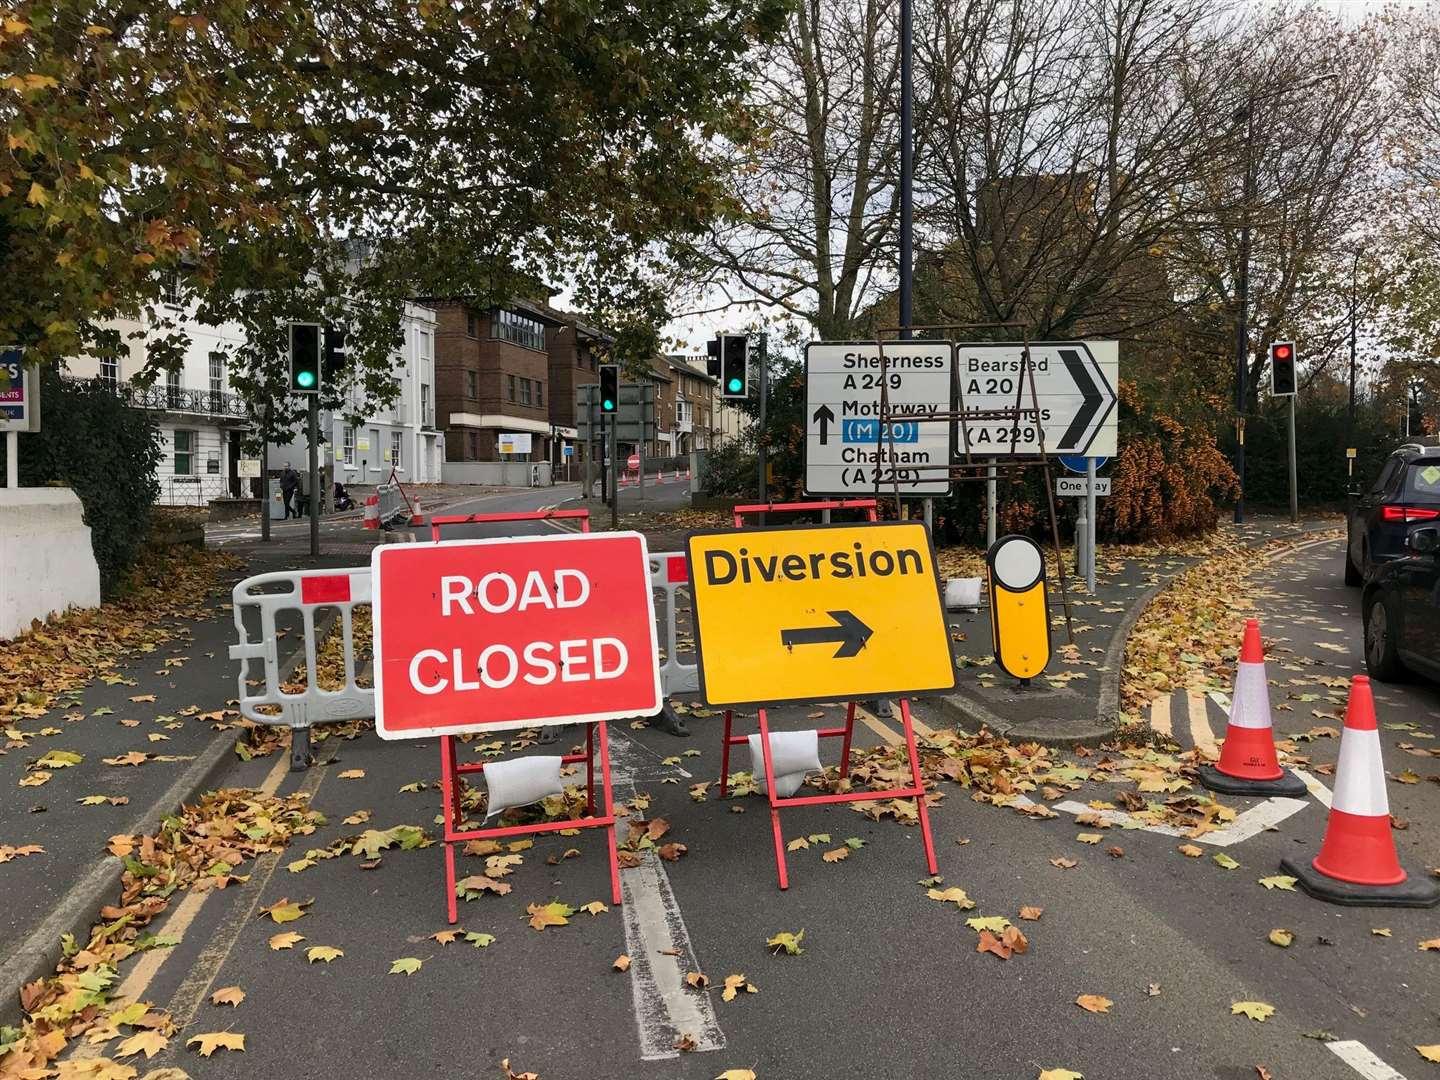 The north-bound carriageway of the A249 Sittingbourne Road is closed